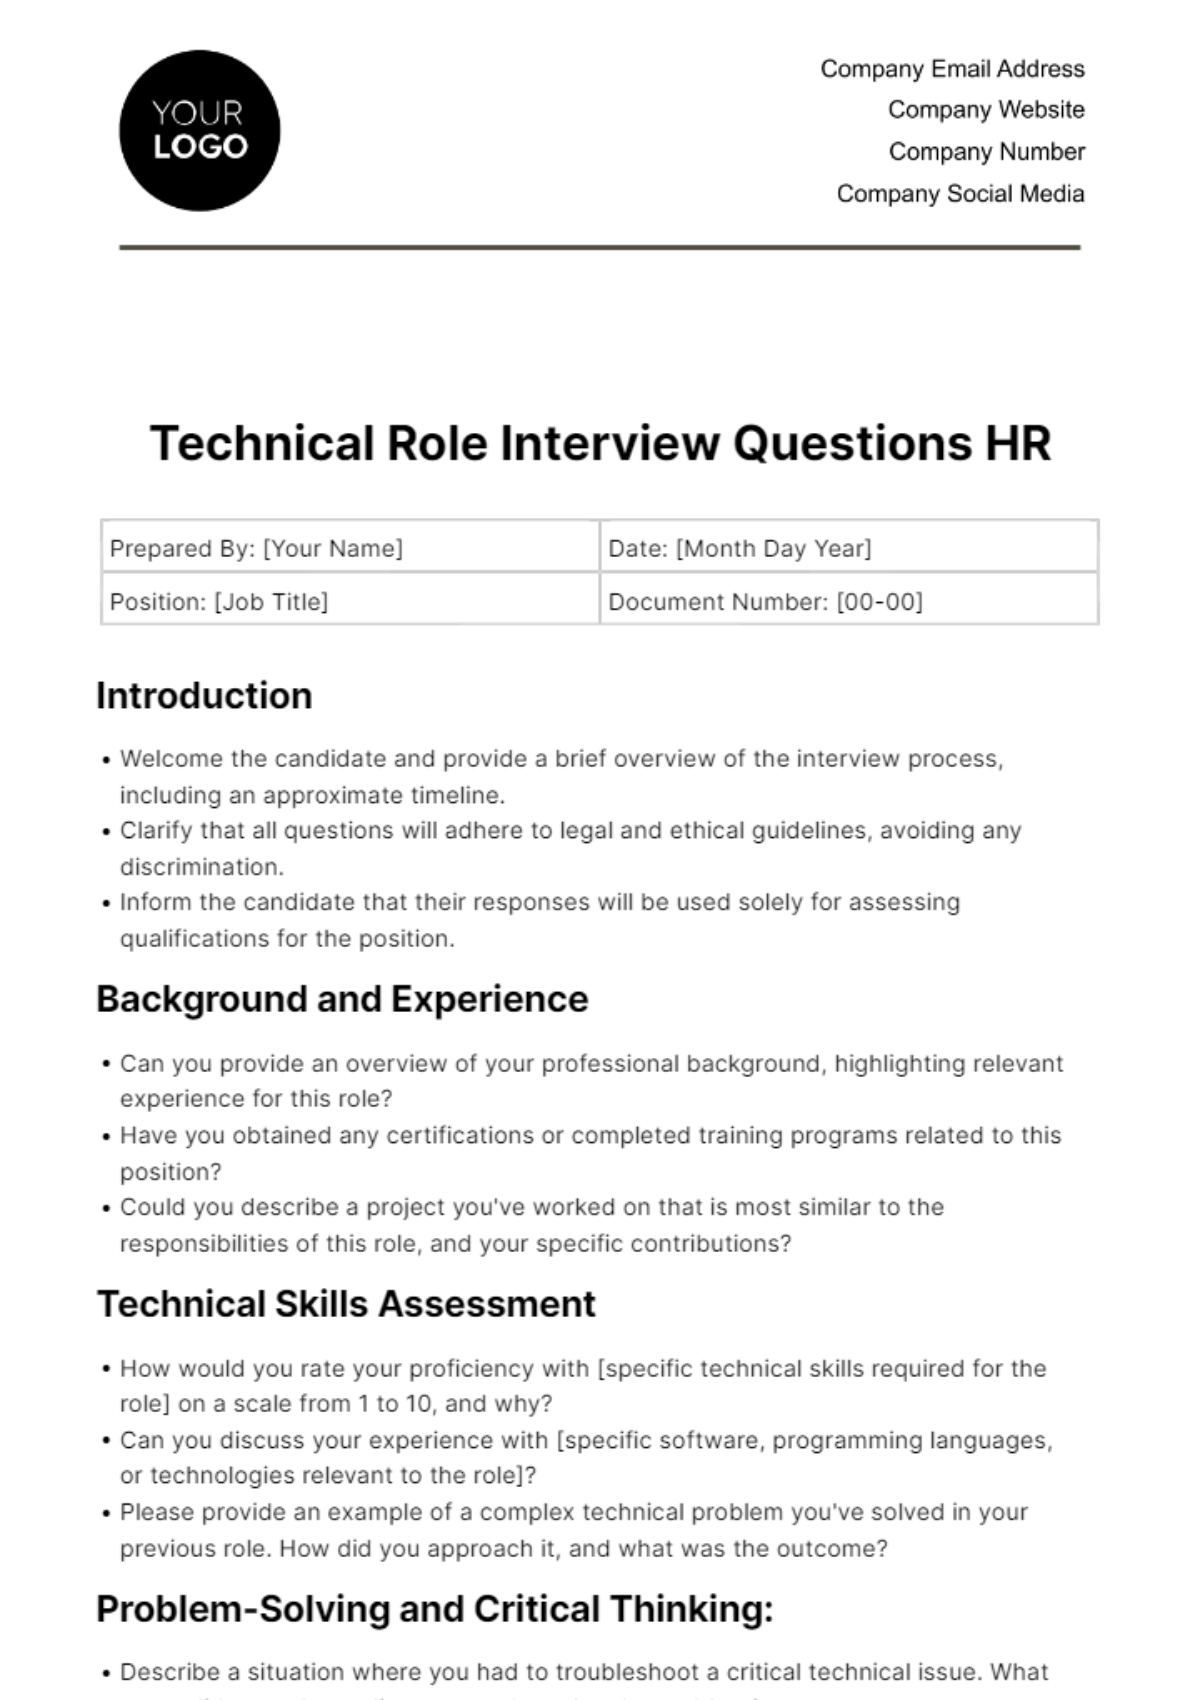 Technical Role Interview Questions HR Template